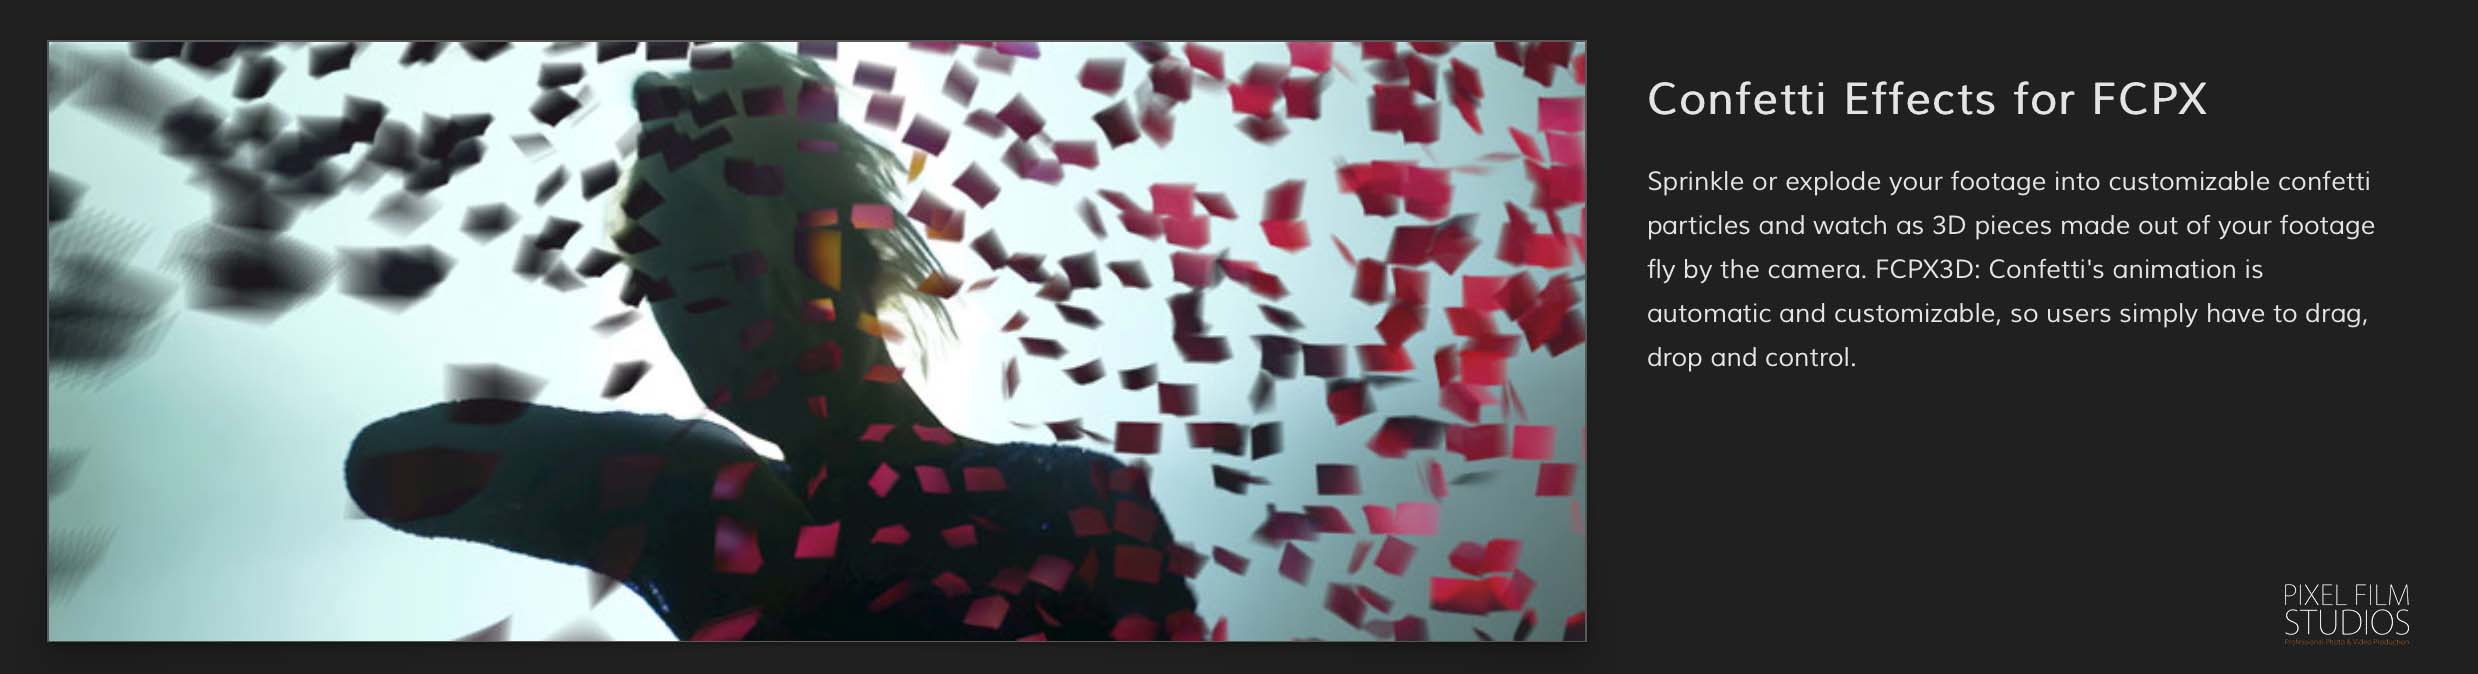 FCPX3D Confetti Transition effect for Final Cut Pro X from Pixel Film Studios